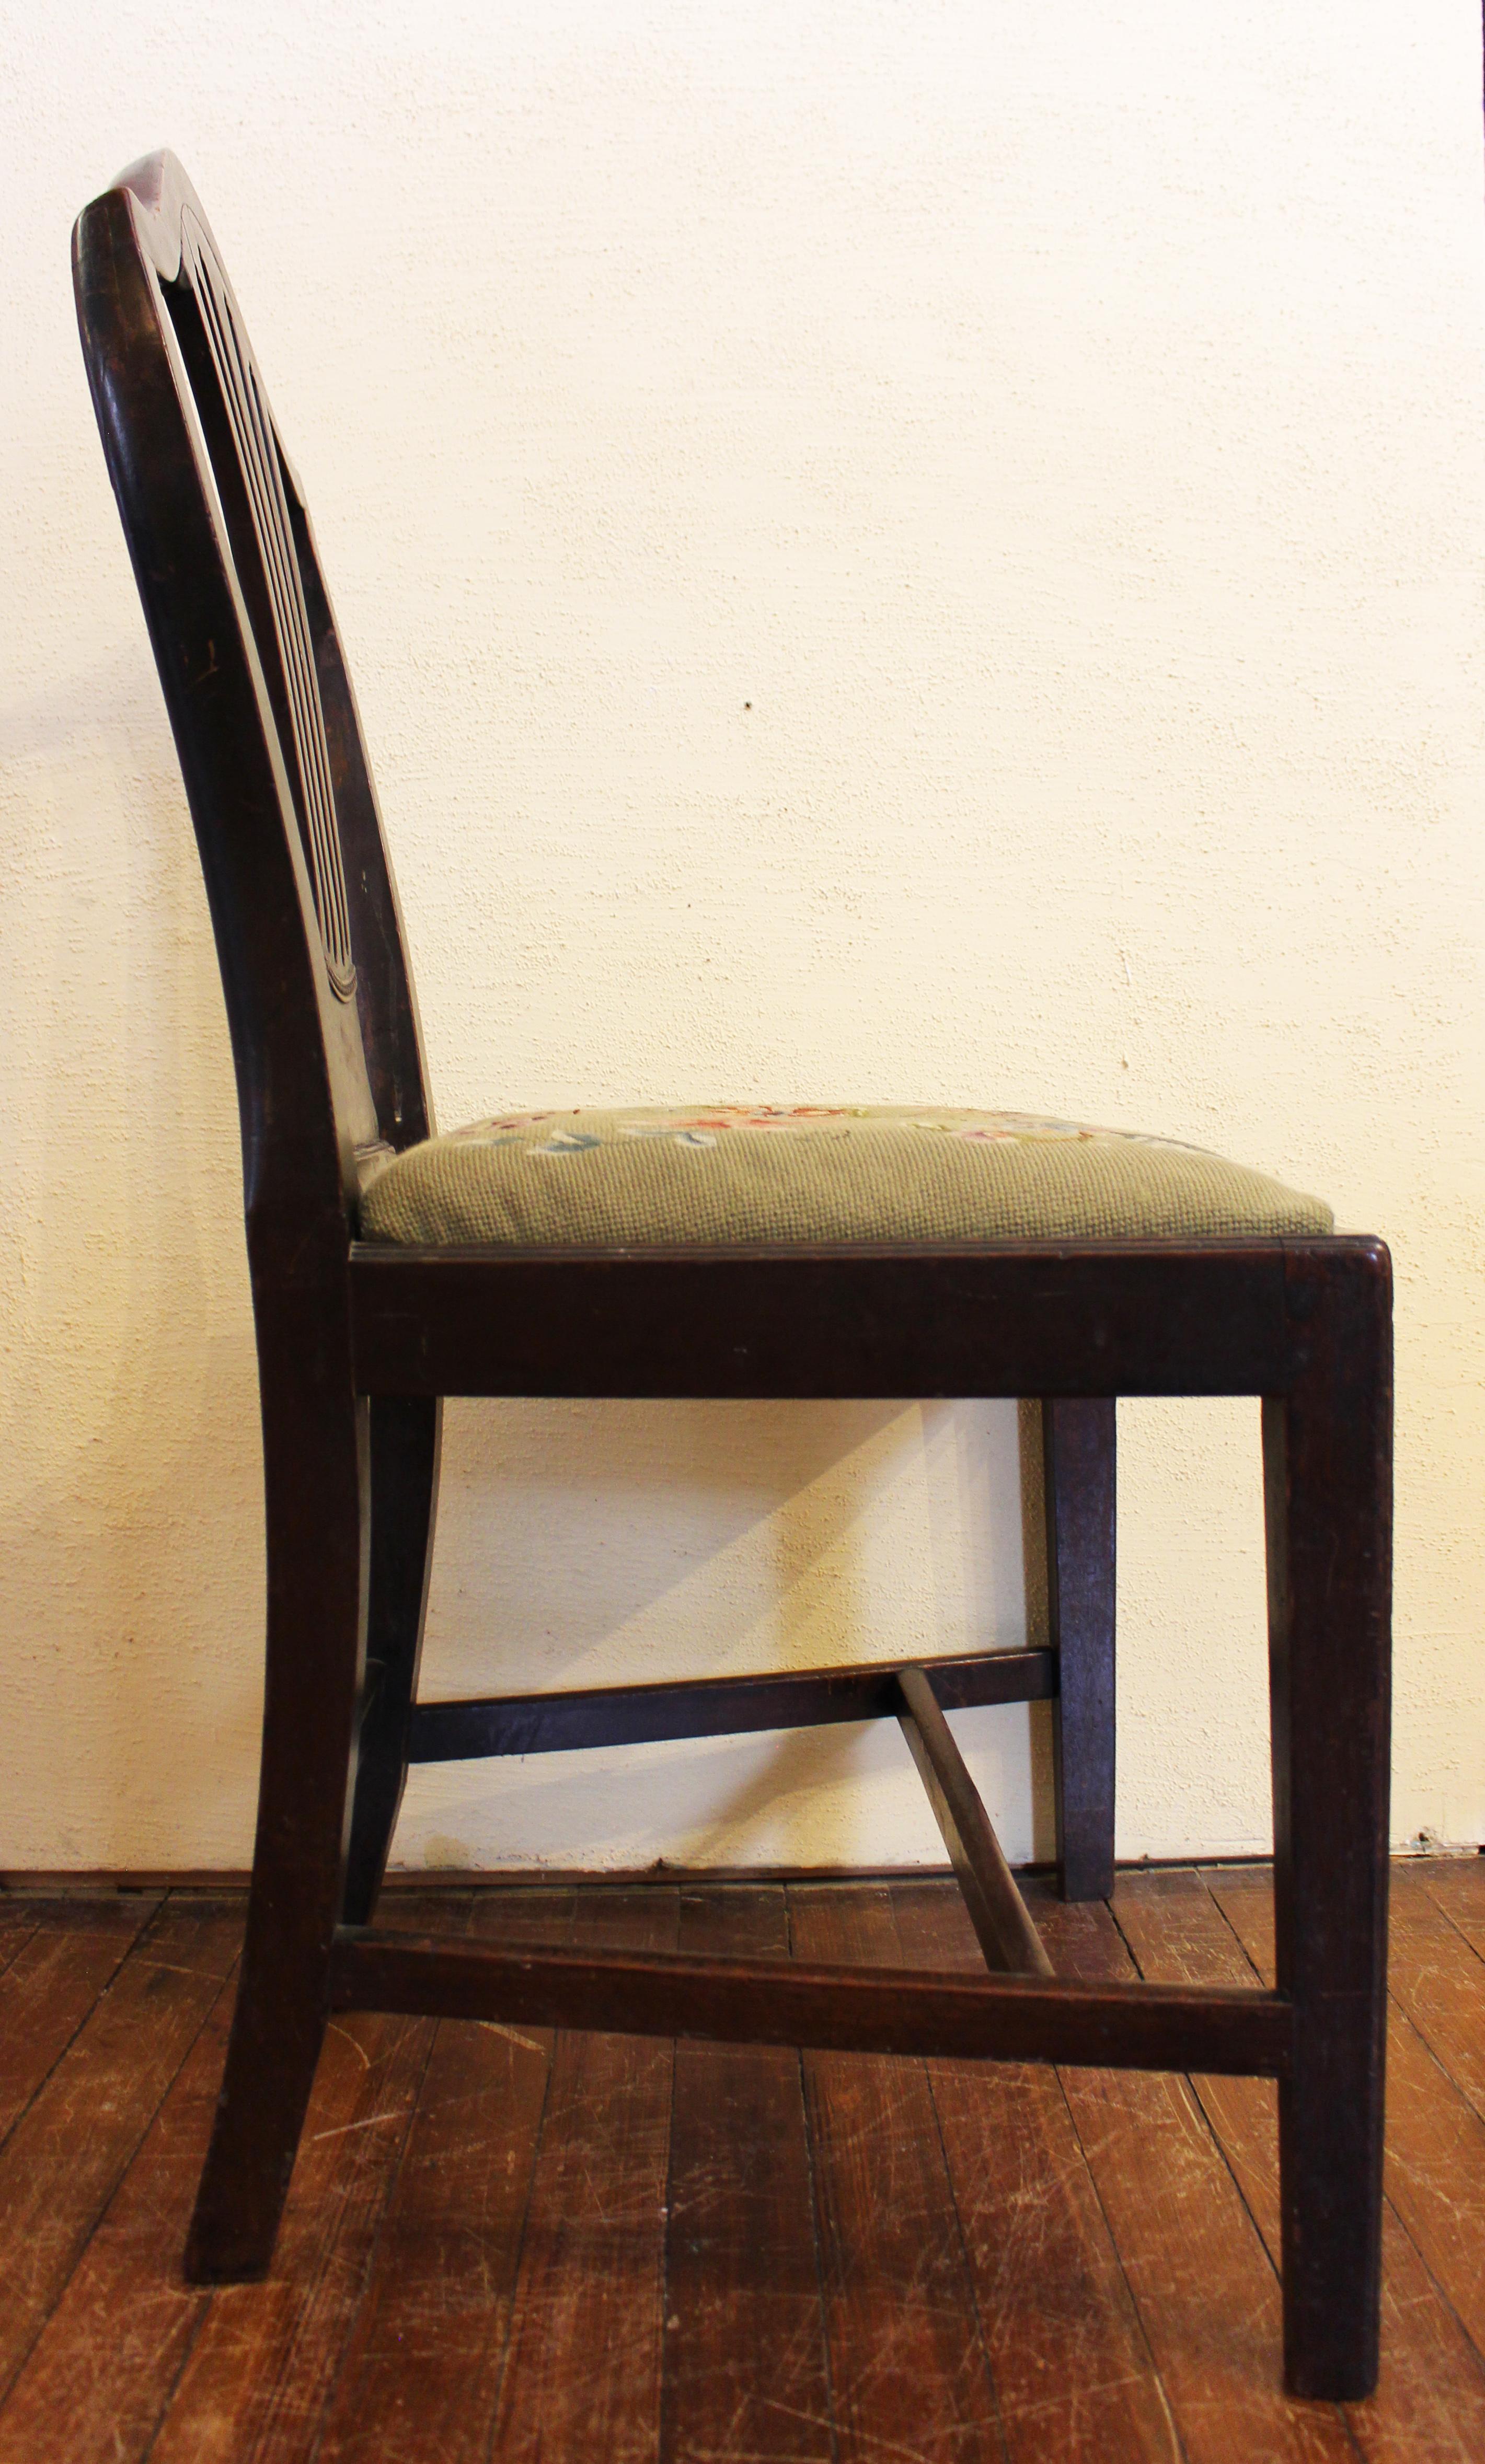 Late 18th Century English Mahogany Side Chair with Needlepoint Slip Seat 2